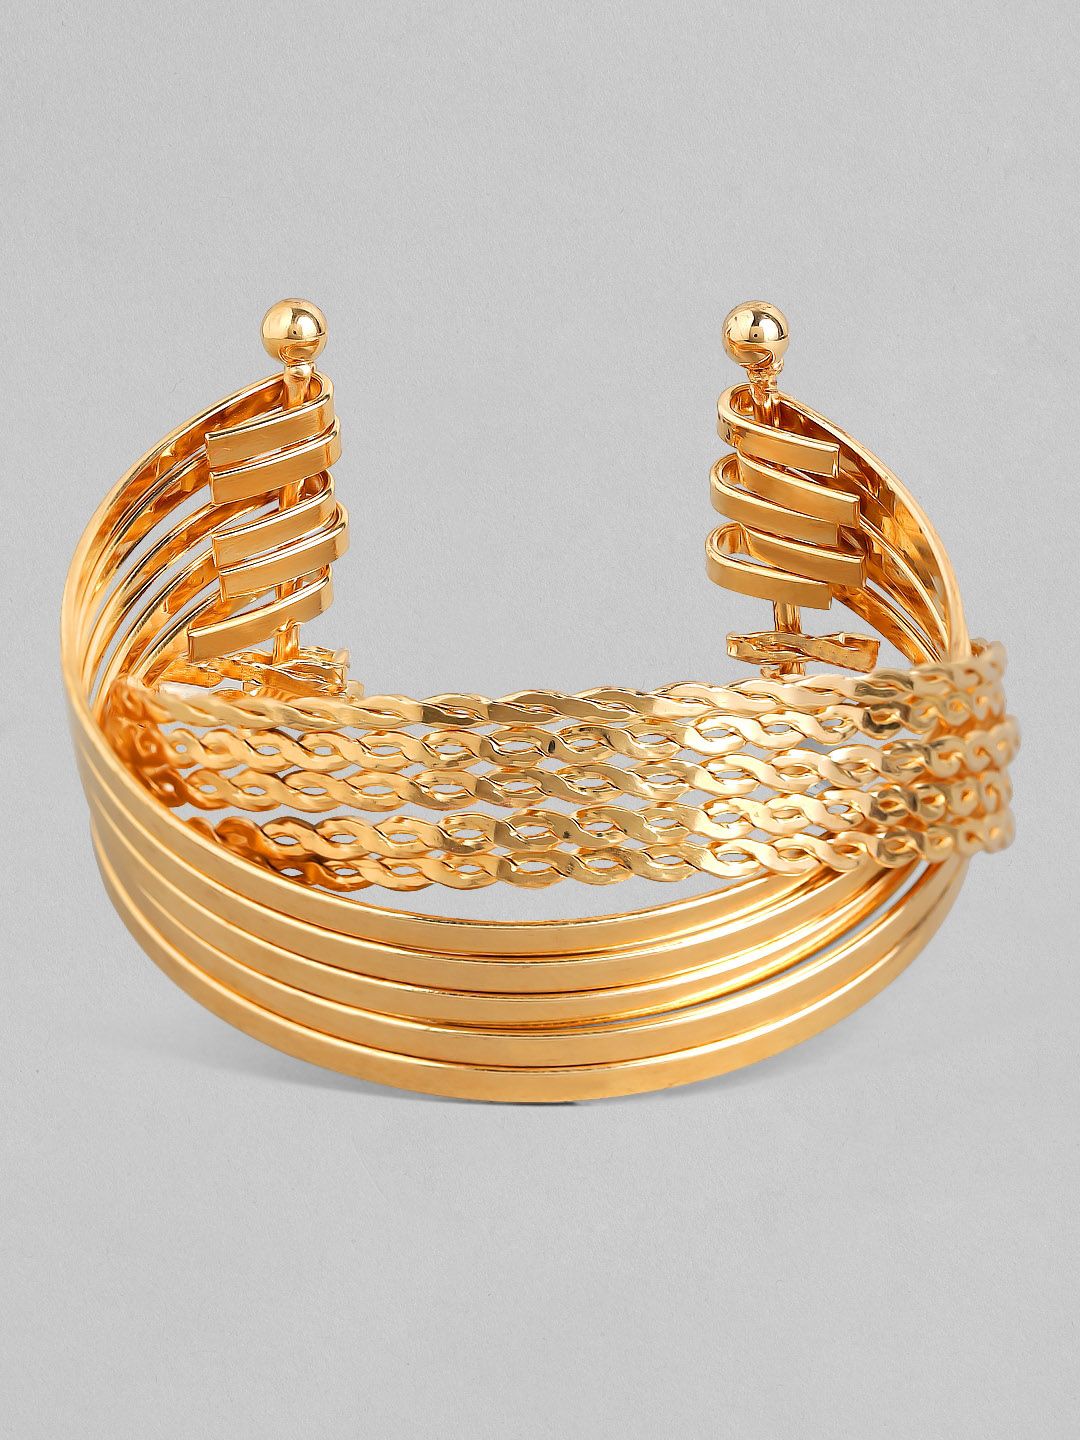 TOKYO TALKIES X rubans FASHION ACCESSORIES Gold-Toned Bracelet Price in India